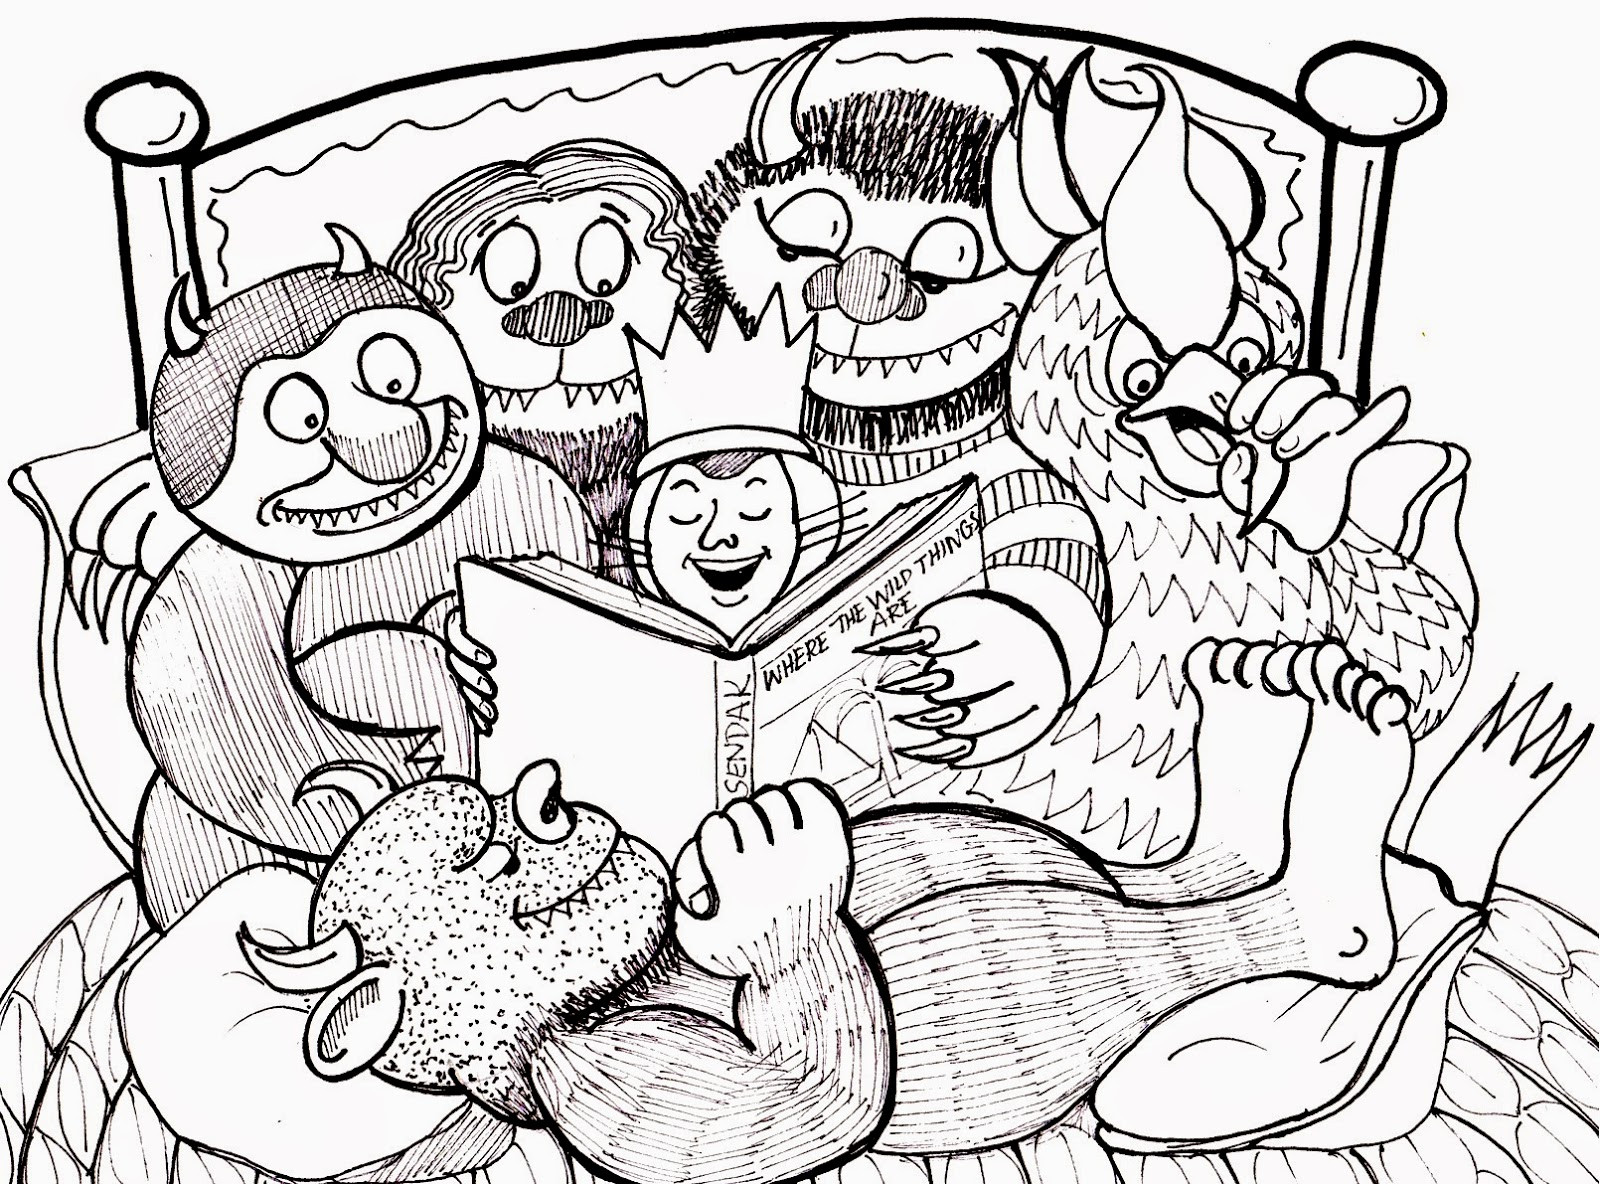 Where The Wild Things Are Free Coloring Sheets
 Where The Wild Things Are Free Coloring Pages